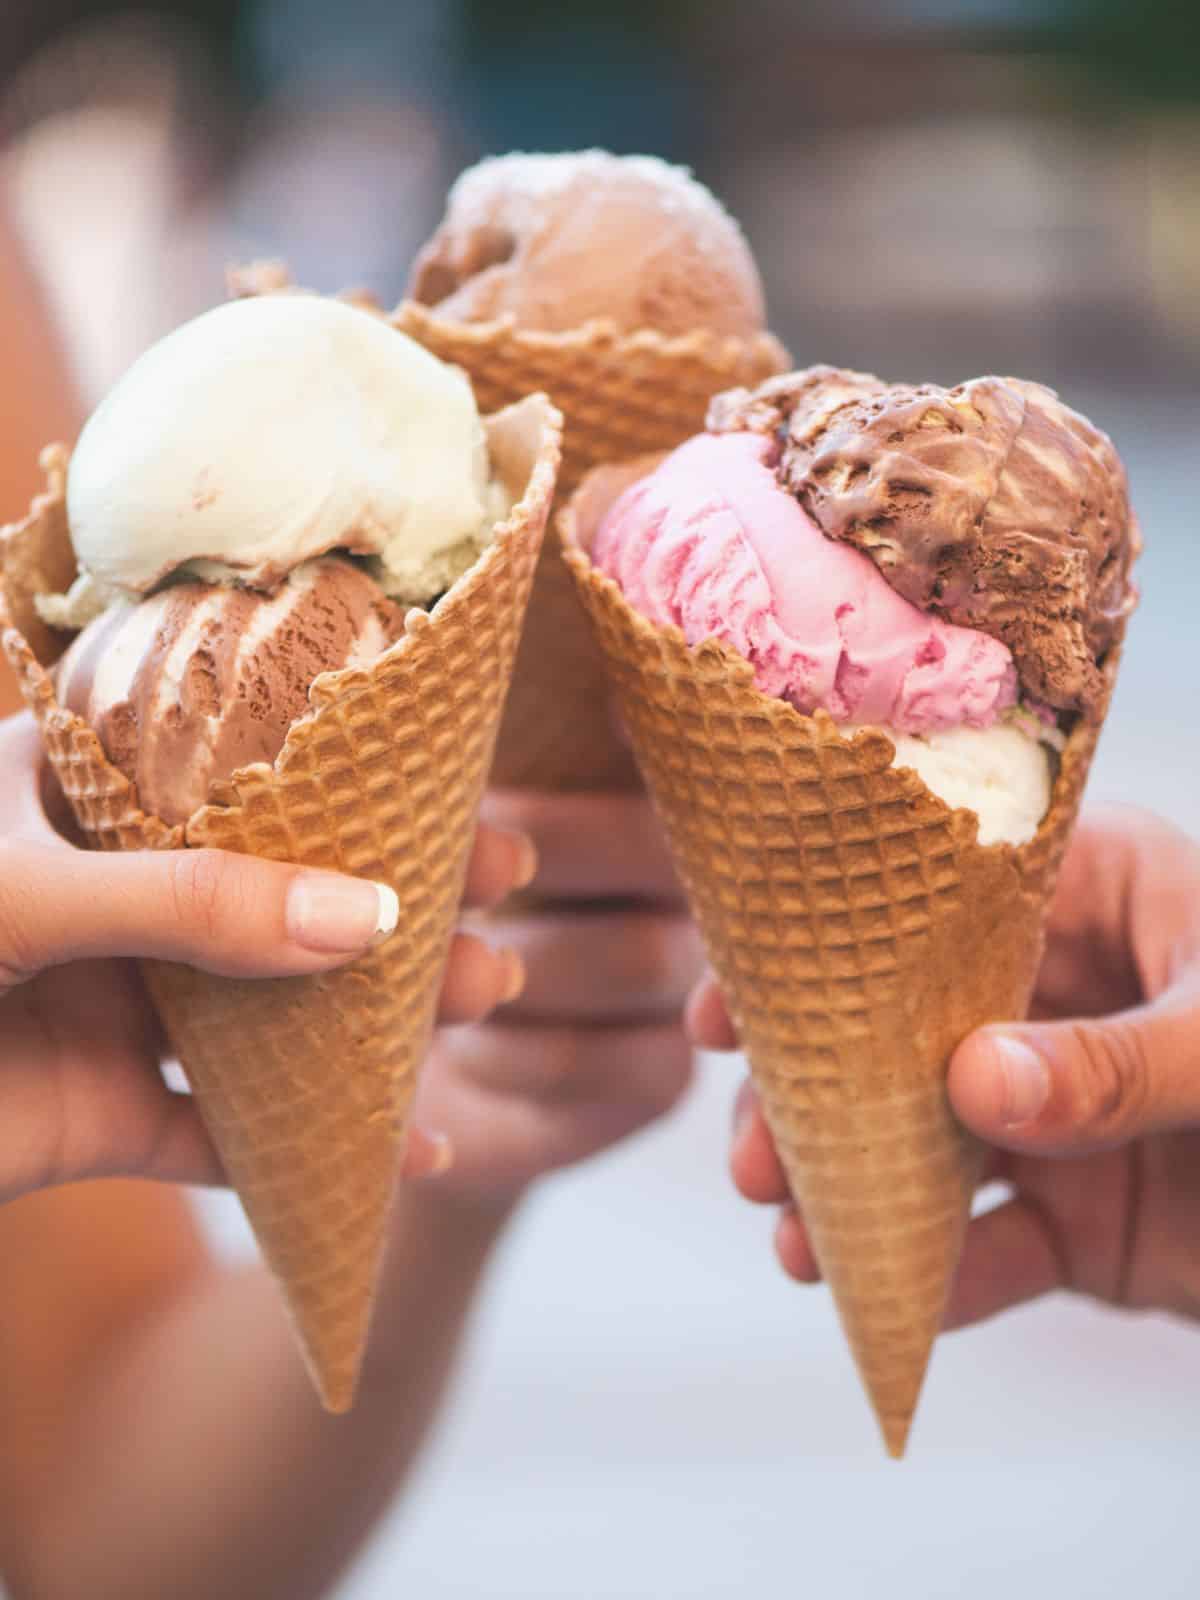 three waffles cones with triple scoops of ice cream.